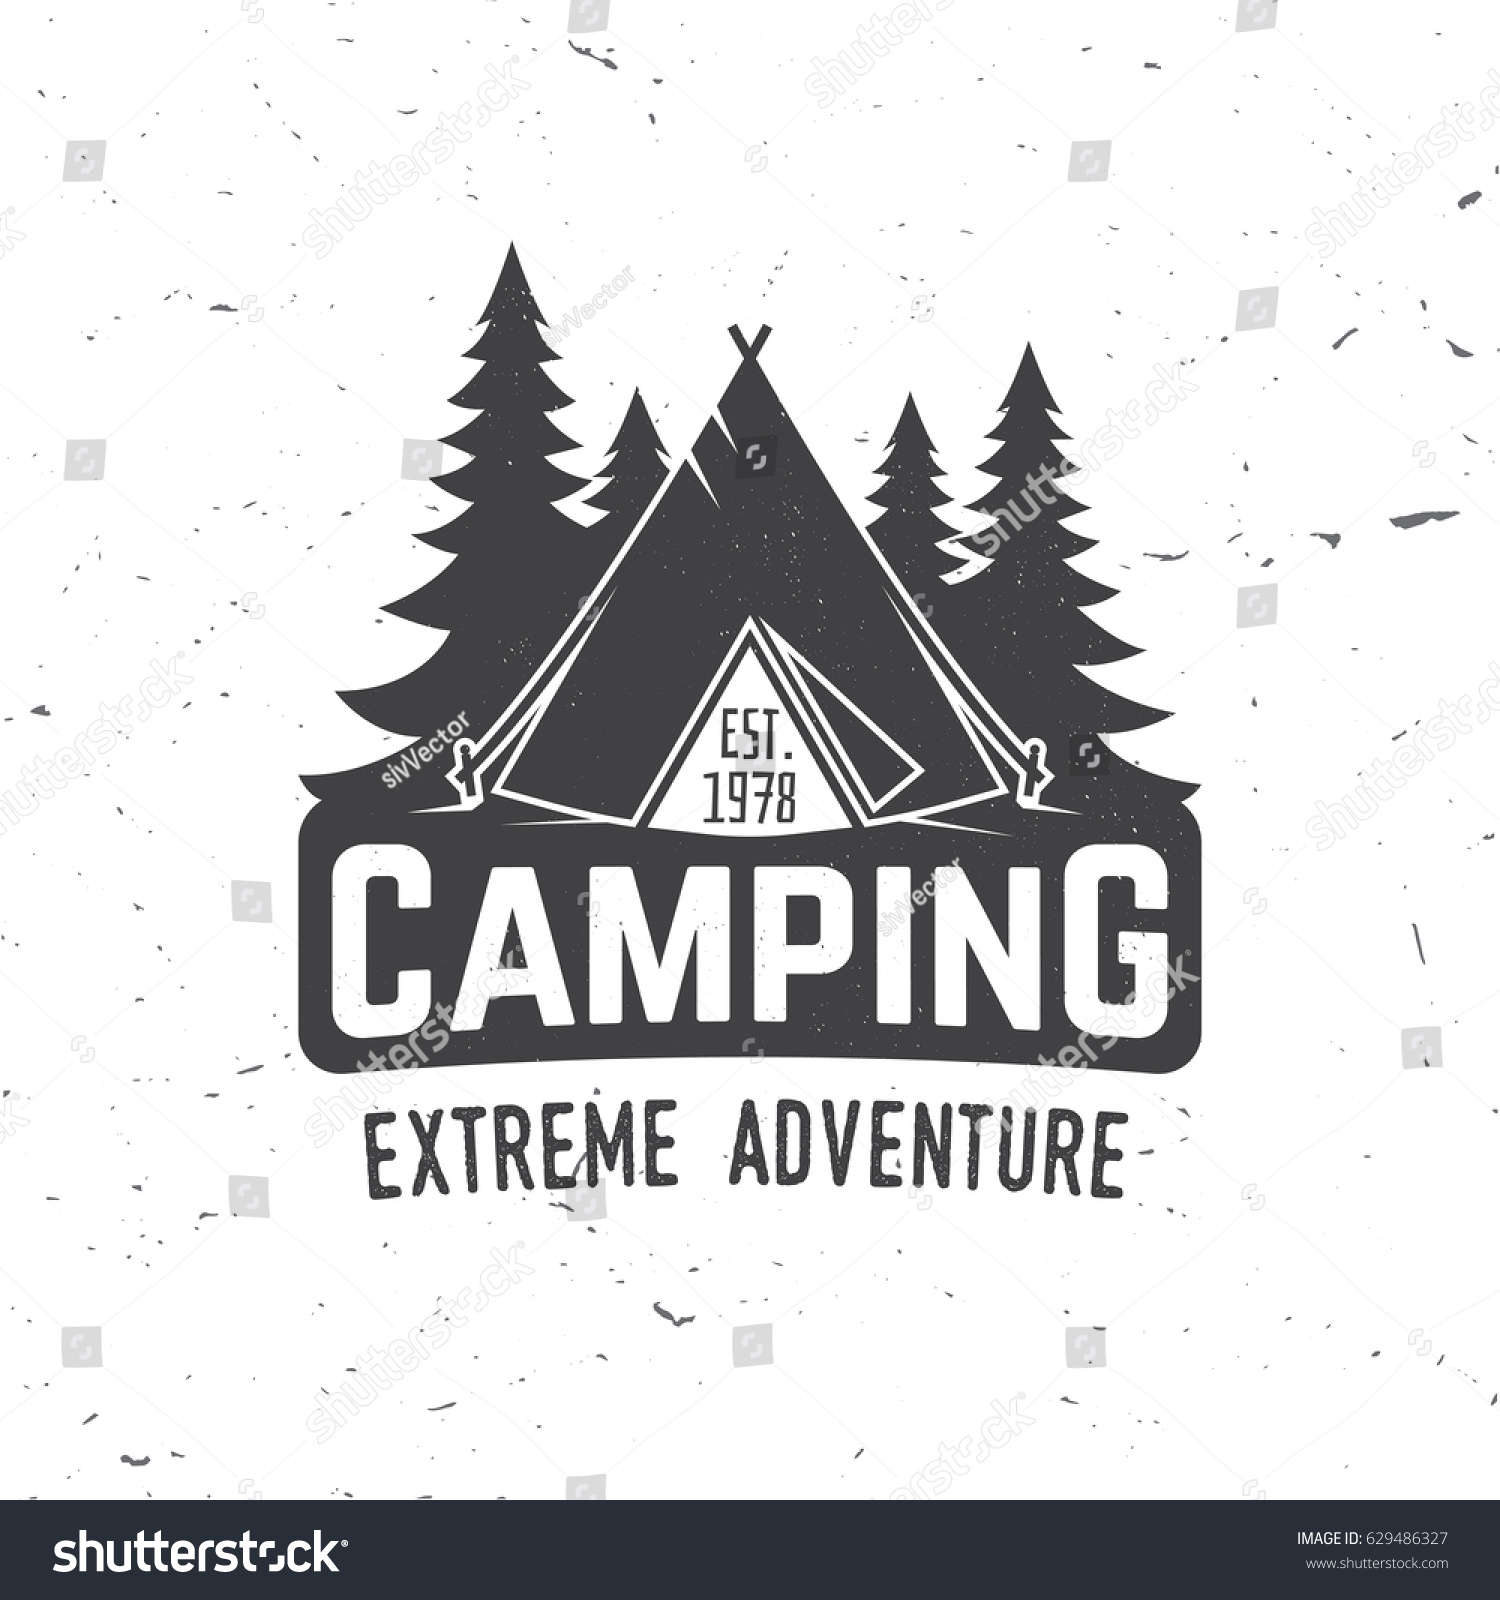 Camping Extreme Adventure Vector Illustration Concept Stock Vector ...